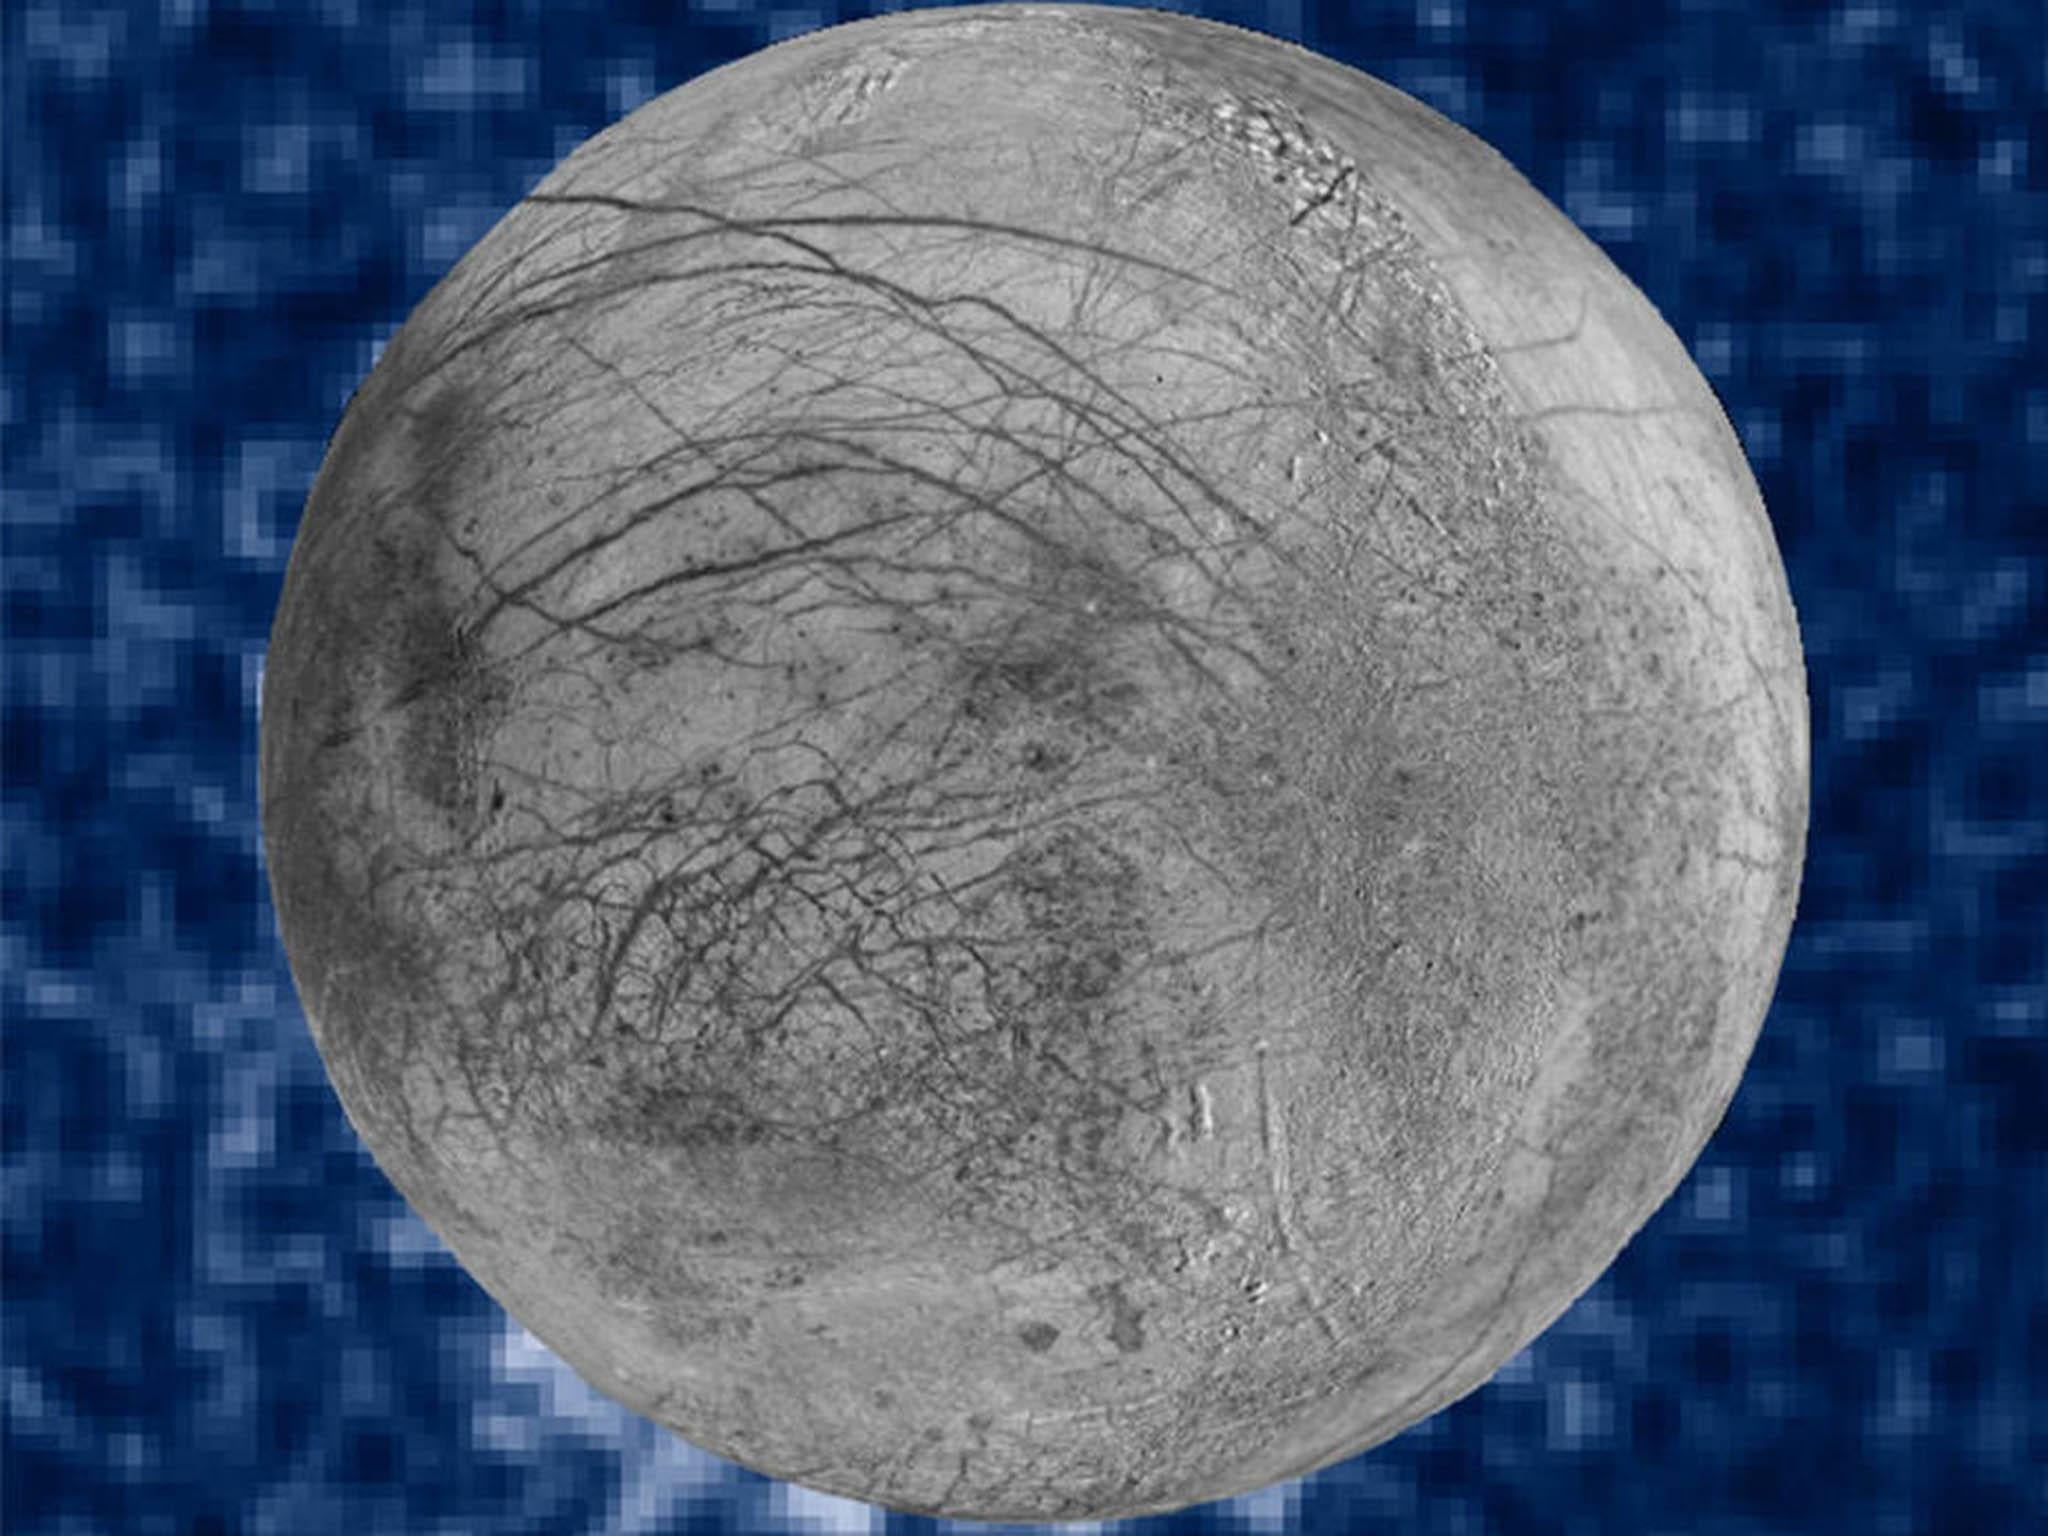 Composite image of suspected water vapour plumes erupting at the seven o’clock position off the limb of Jupiter’s moon Europa